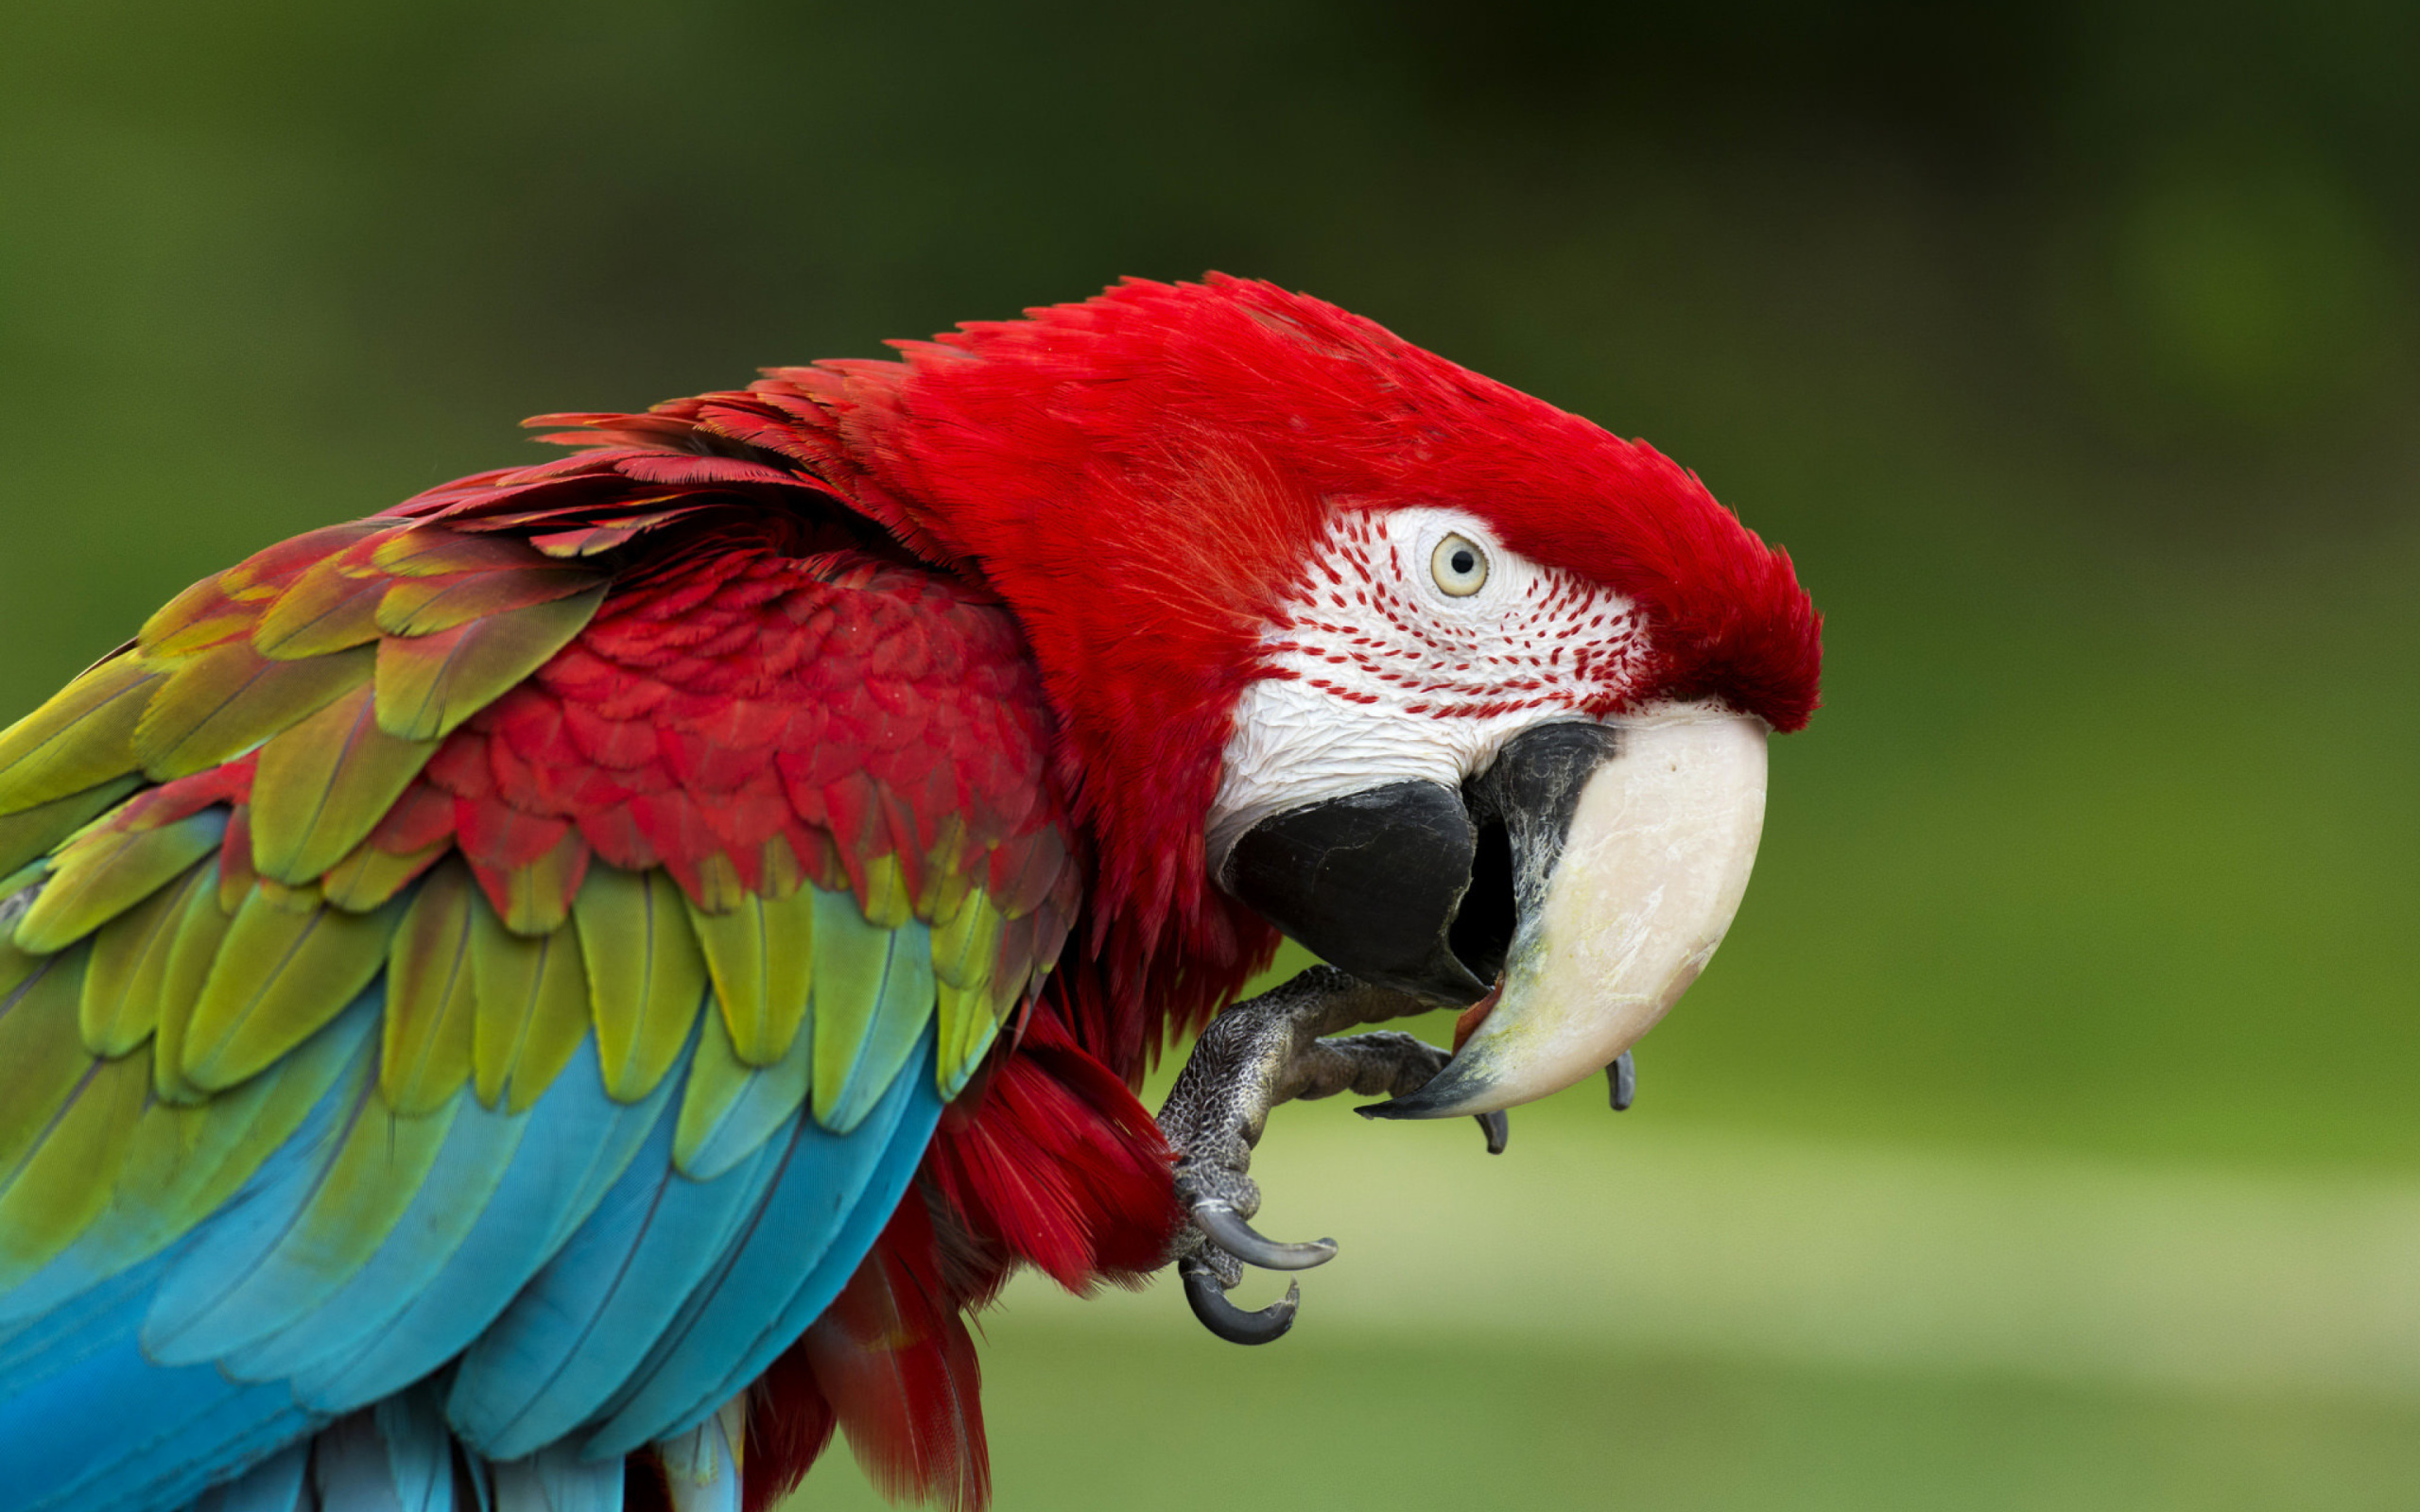 Green winged macaw wallpaper 2560x1600